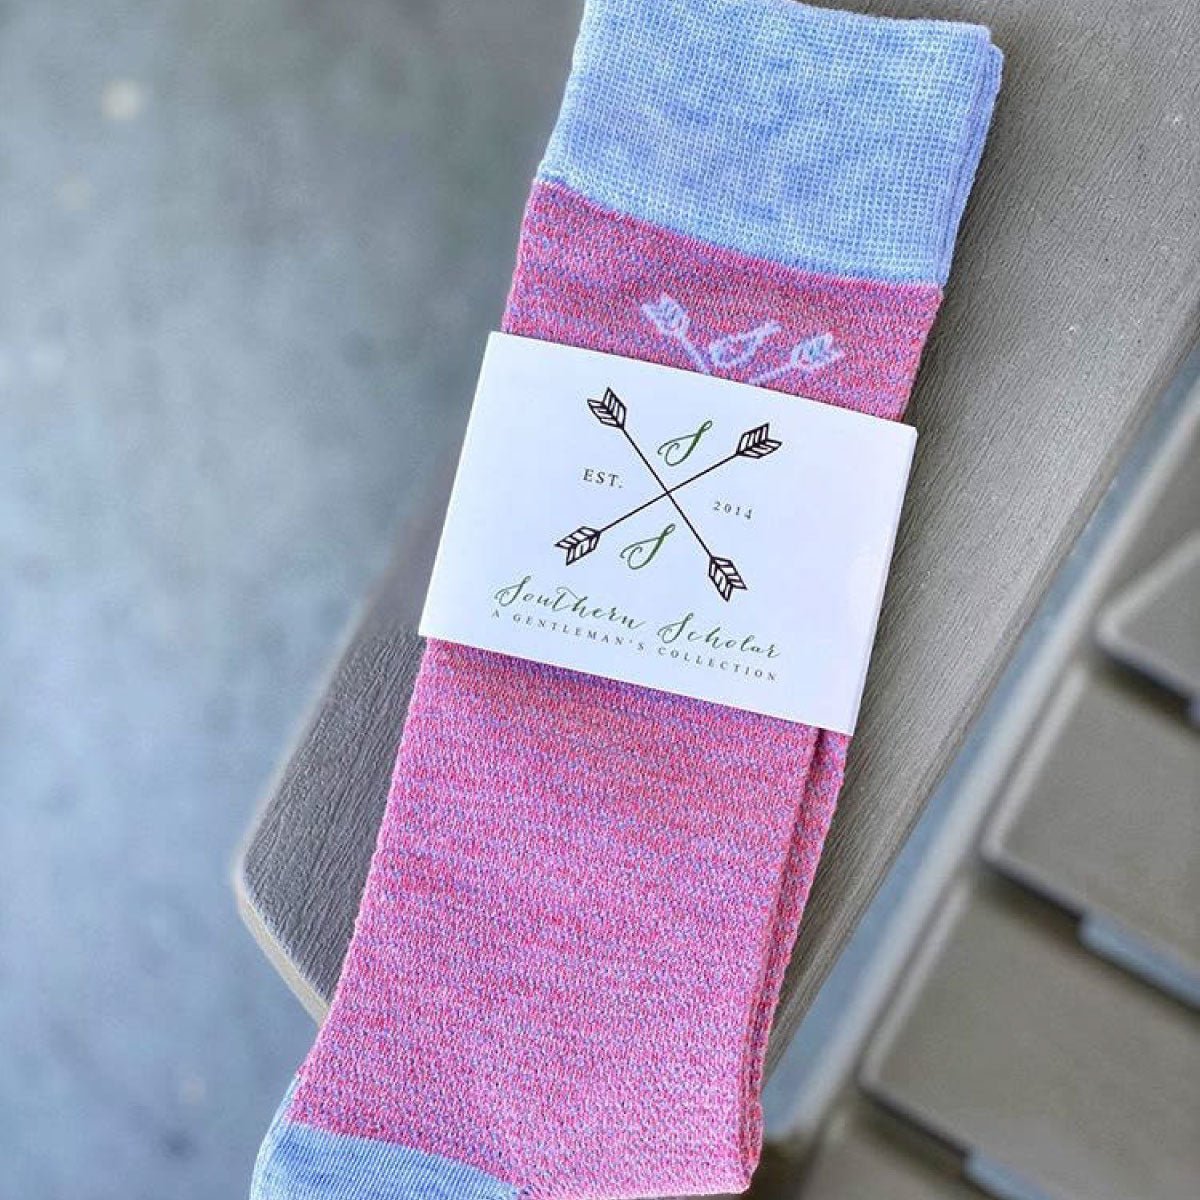 A pair of pink and blue textured men's dress socks